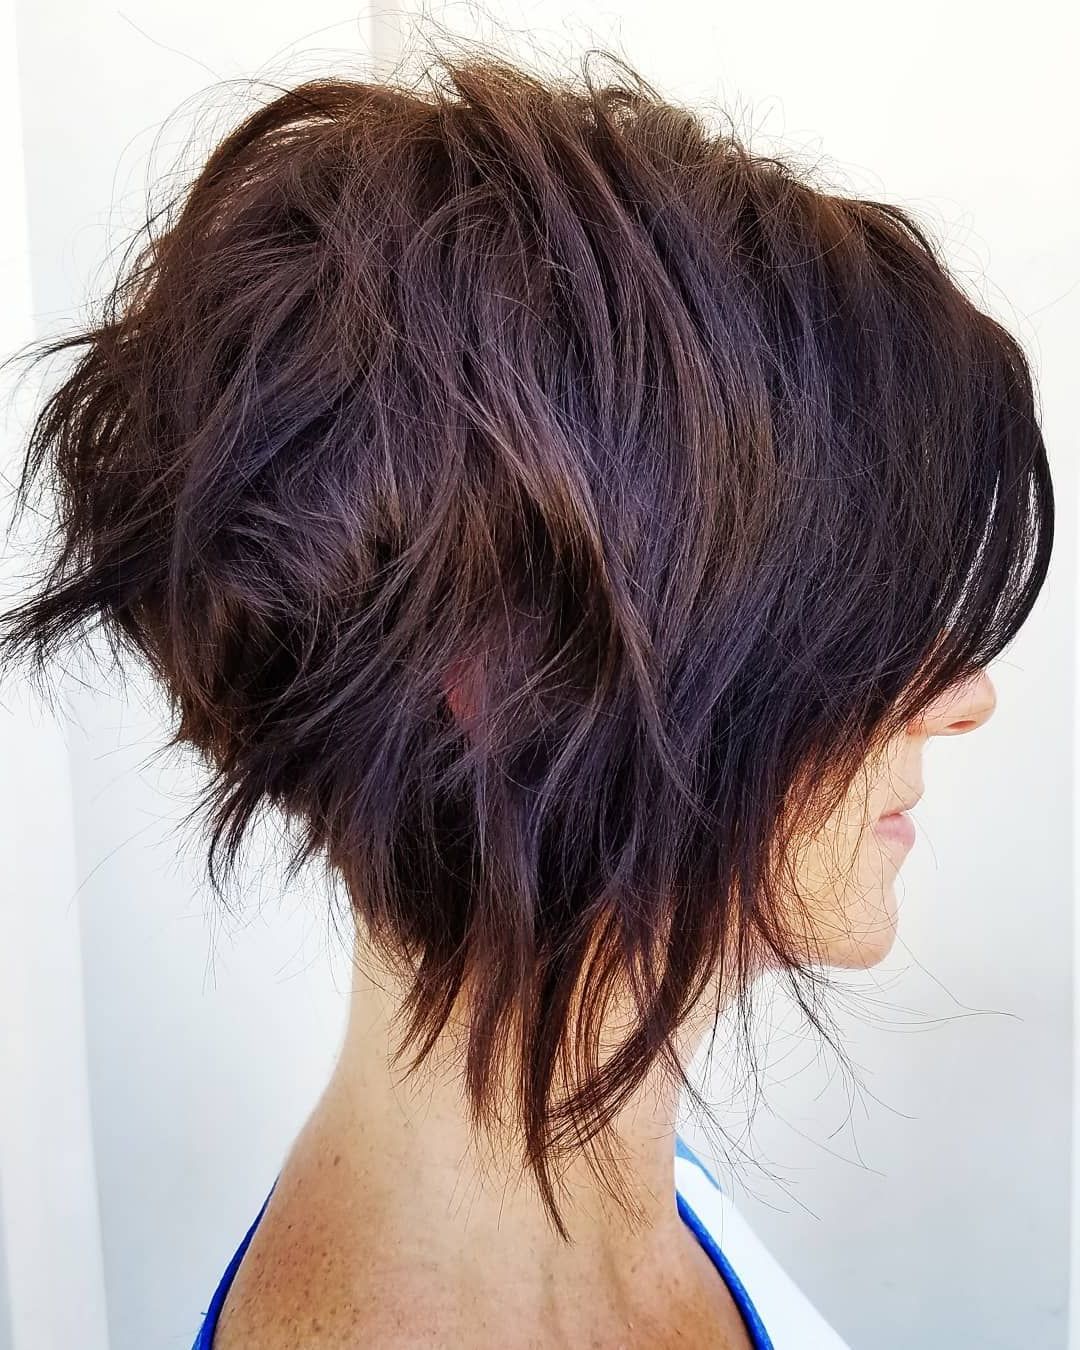 2017 Trendy Messy Bob Hairstyles Intended For 10 Trendy Messy Bob Hairstyles And Haircuts, 2019 Female (View 4 of 20)